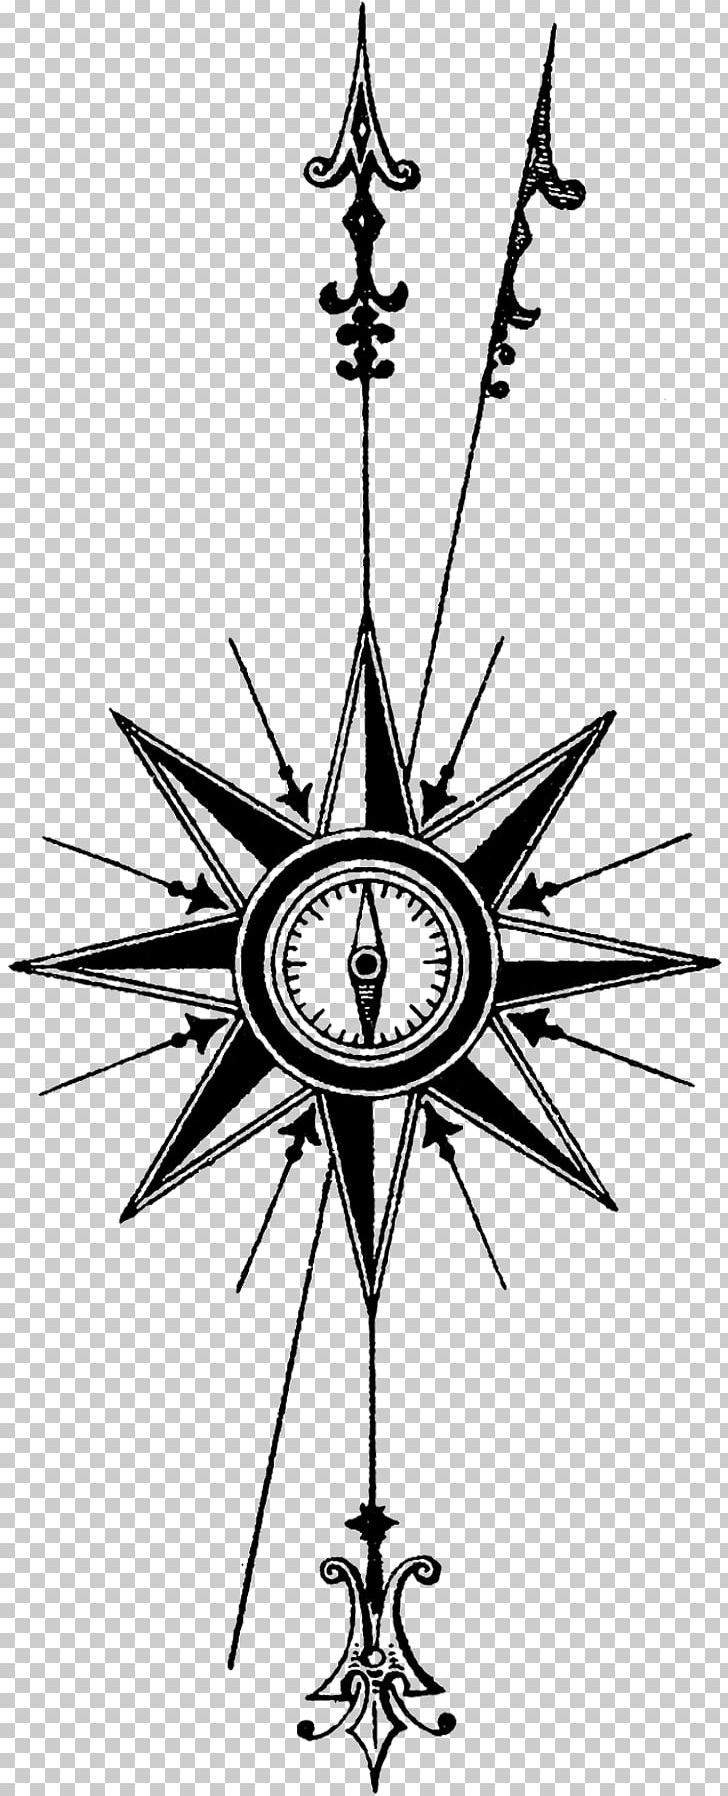 True North Compass Rose Tattoo PNG, Clipart, Black And White, Cardinal Direction, Compas, Compass, Compass Rose Free PNG Download